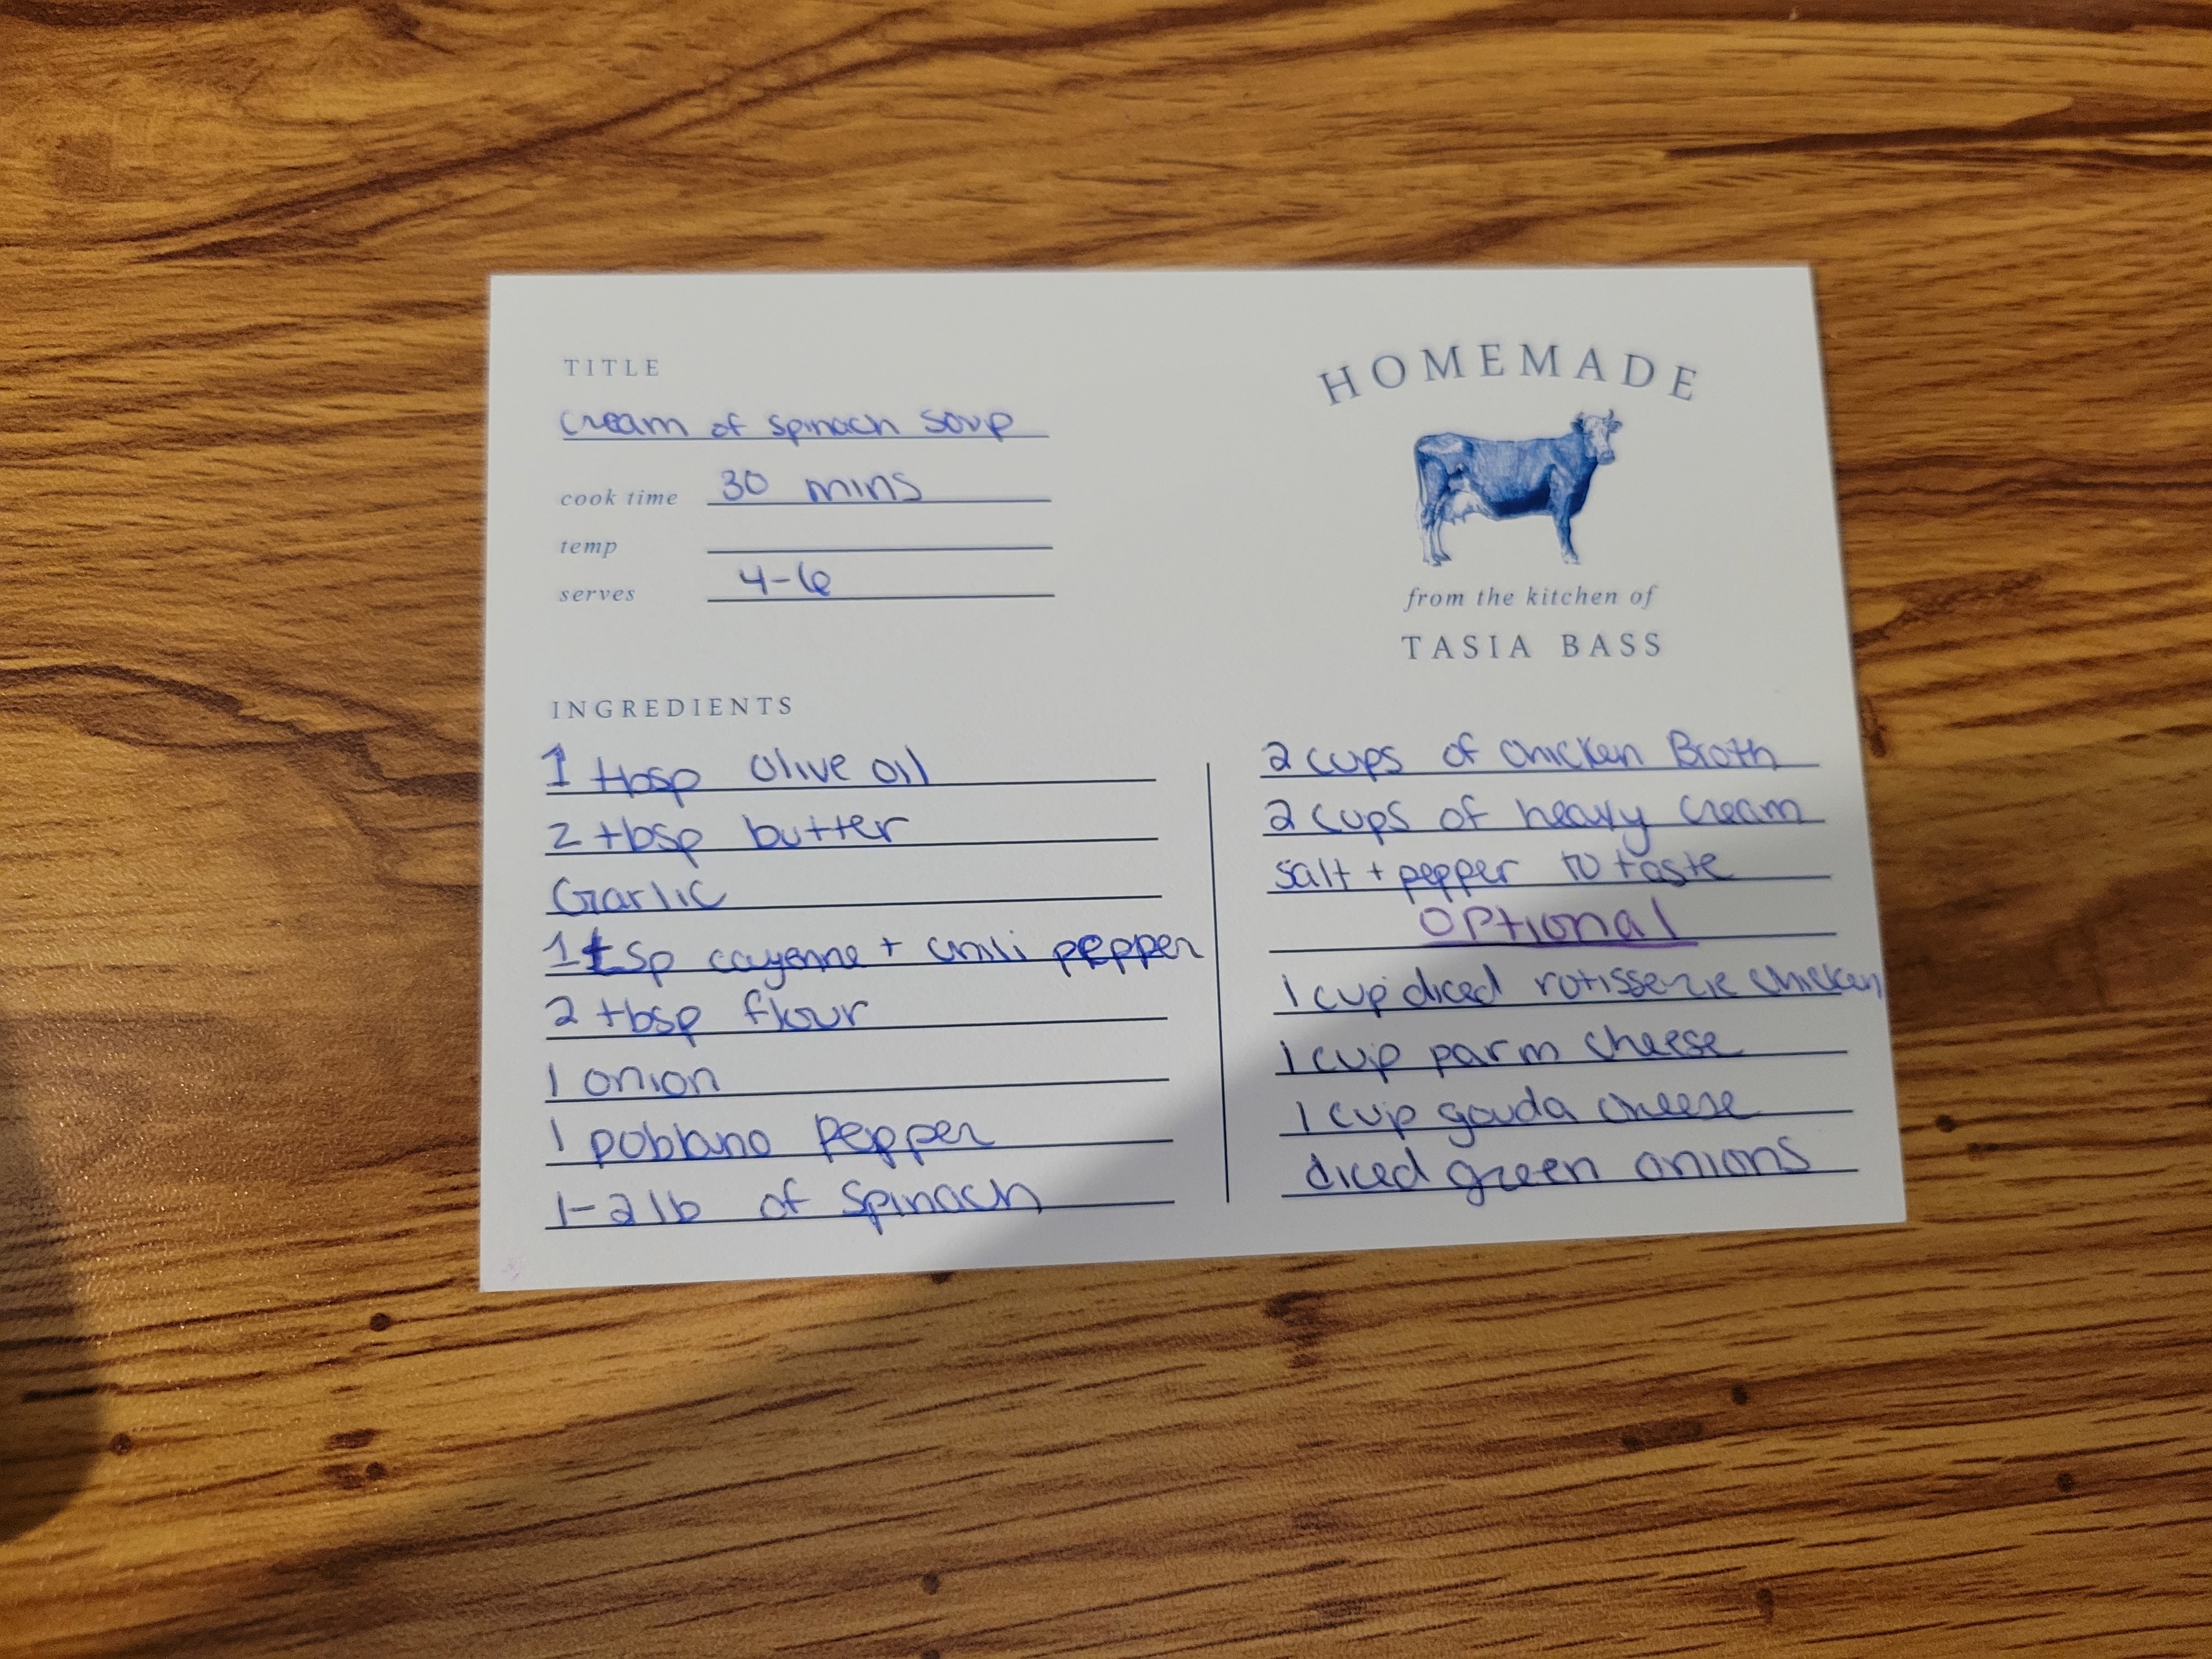 Recipe card for cream of spinach soup